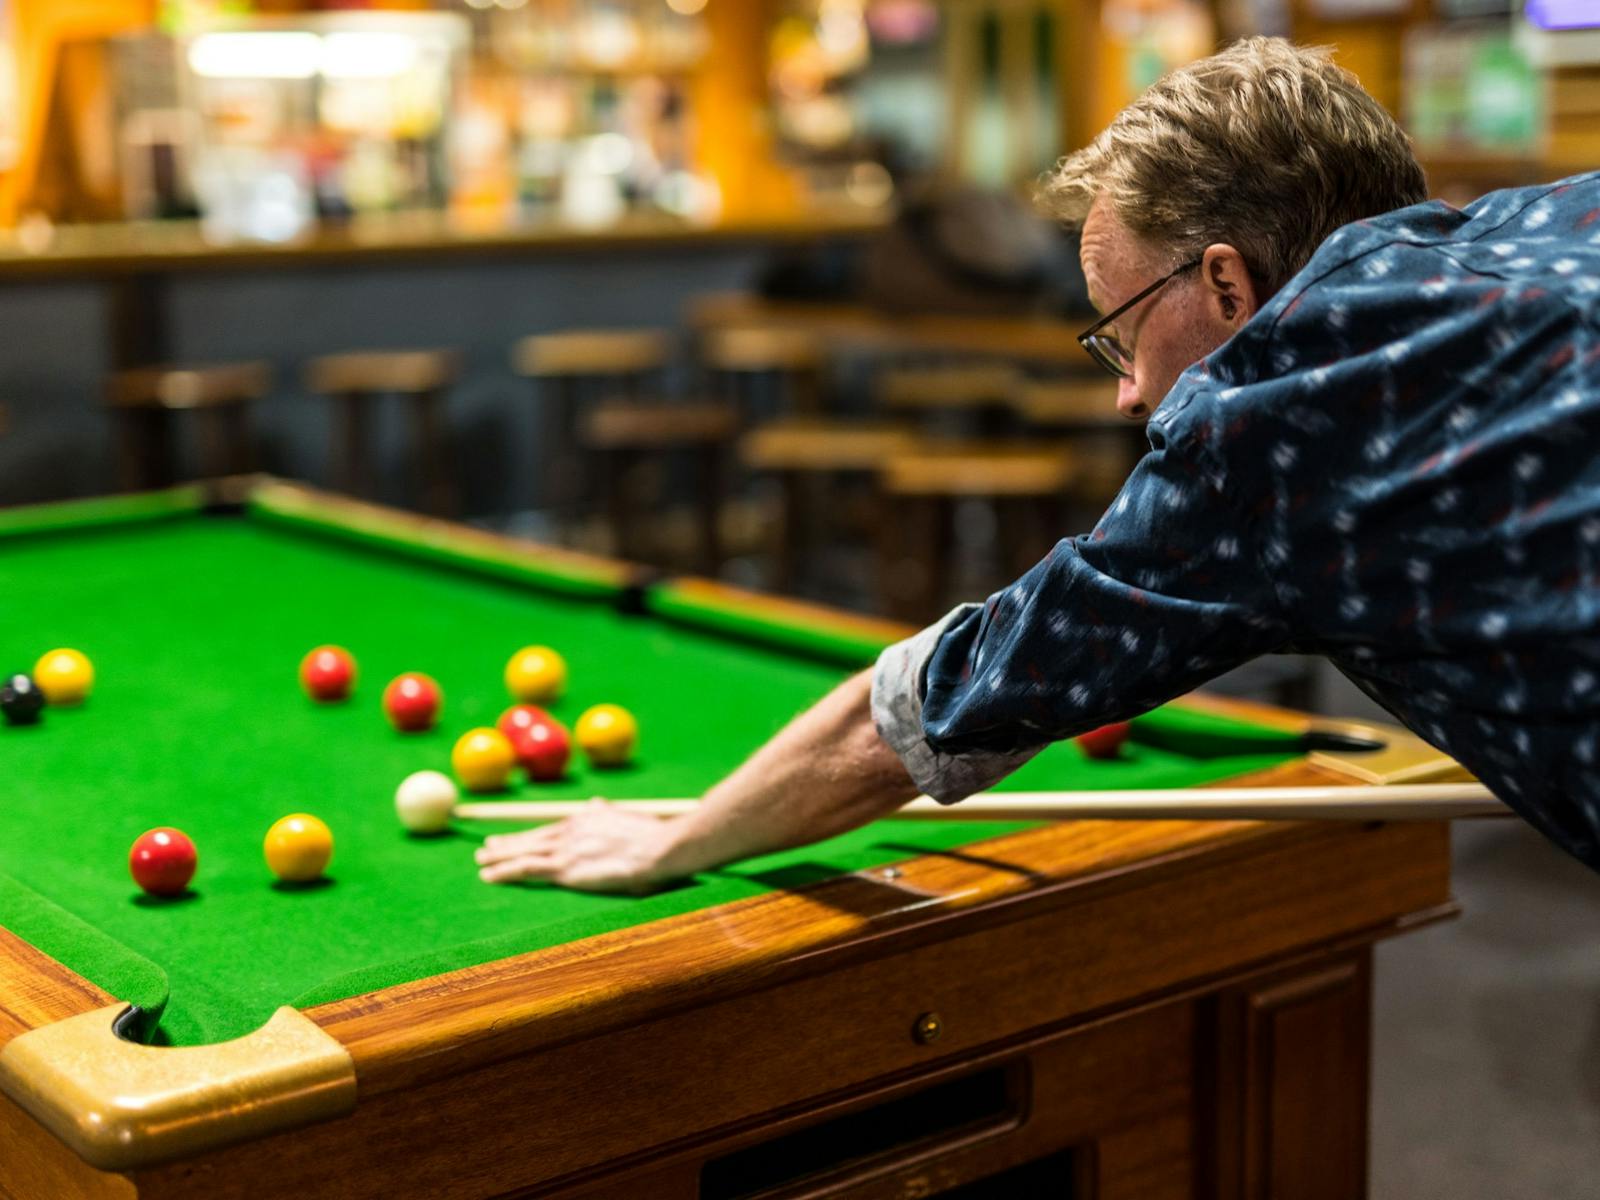 Man lining up a shot on a pool table with bar in background